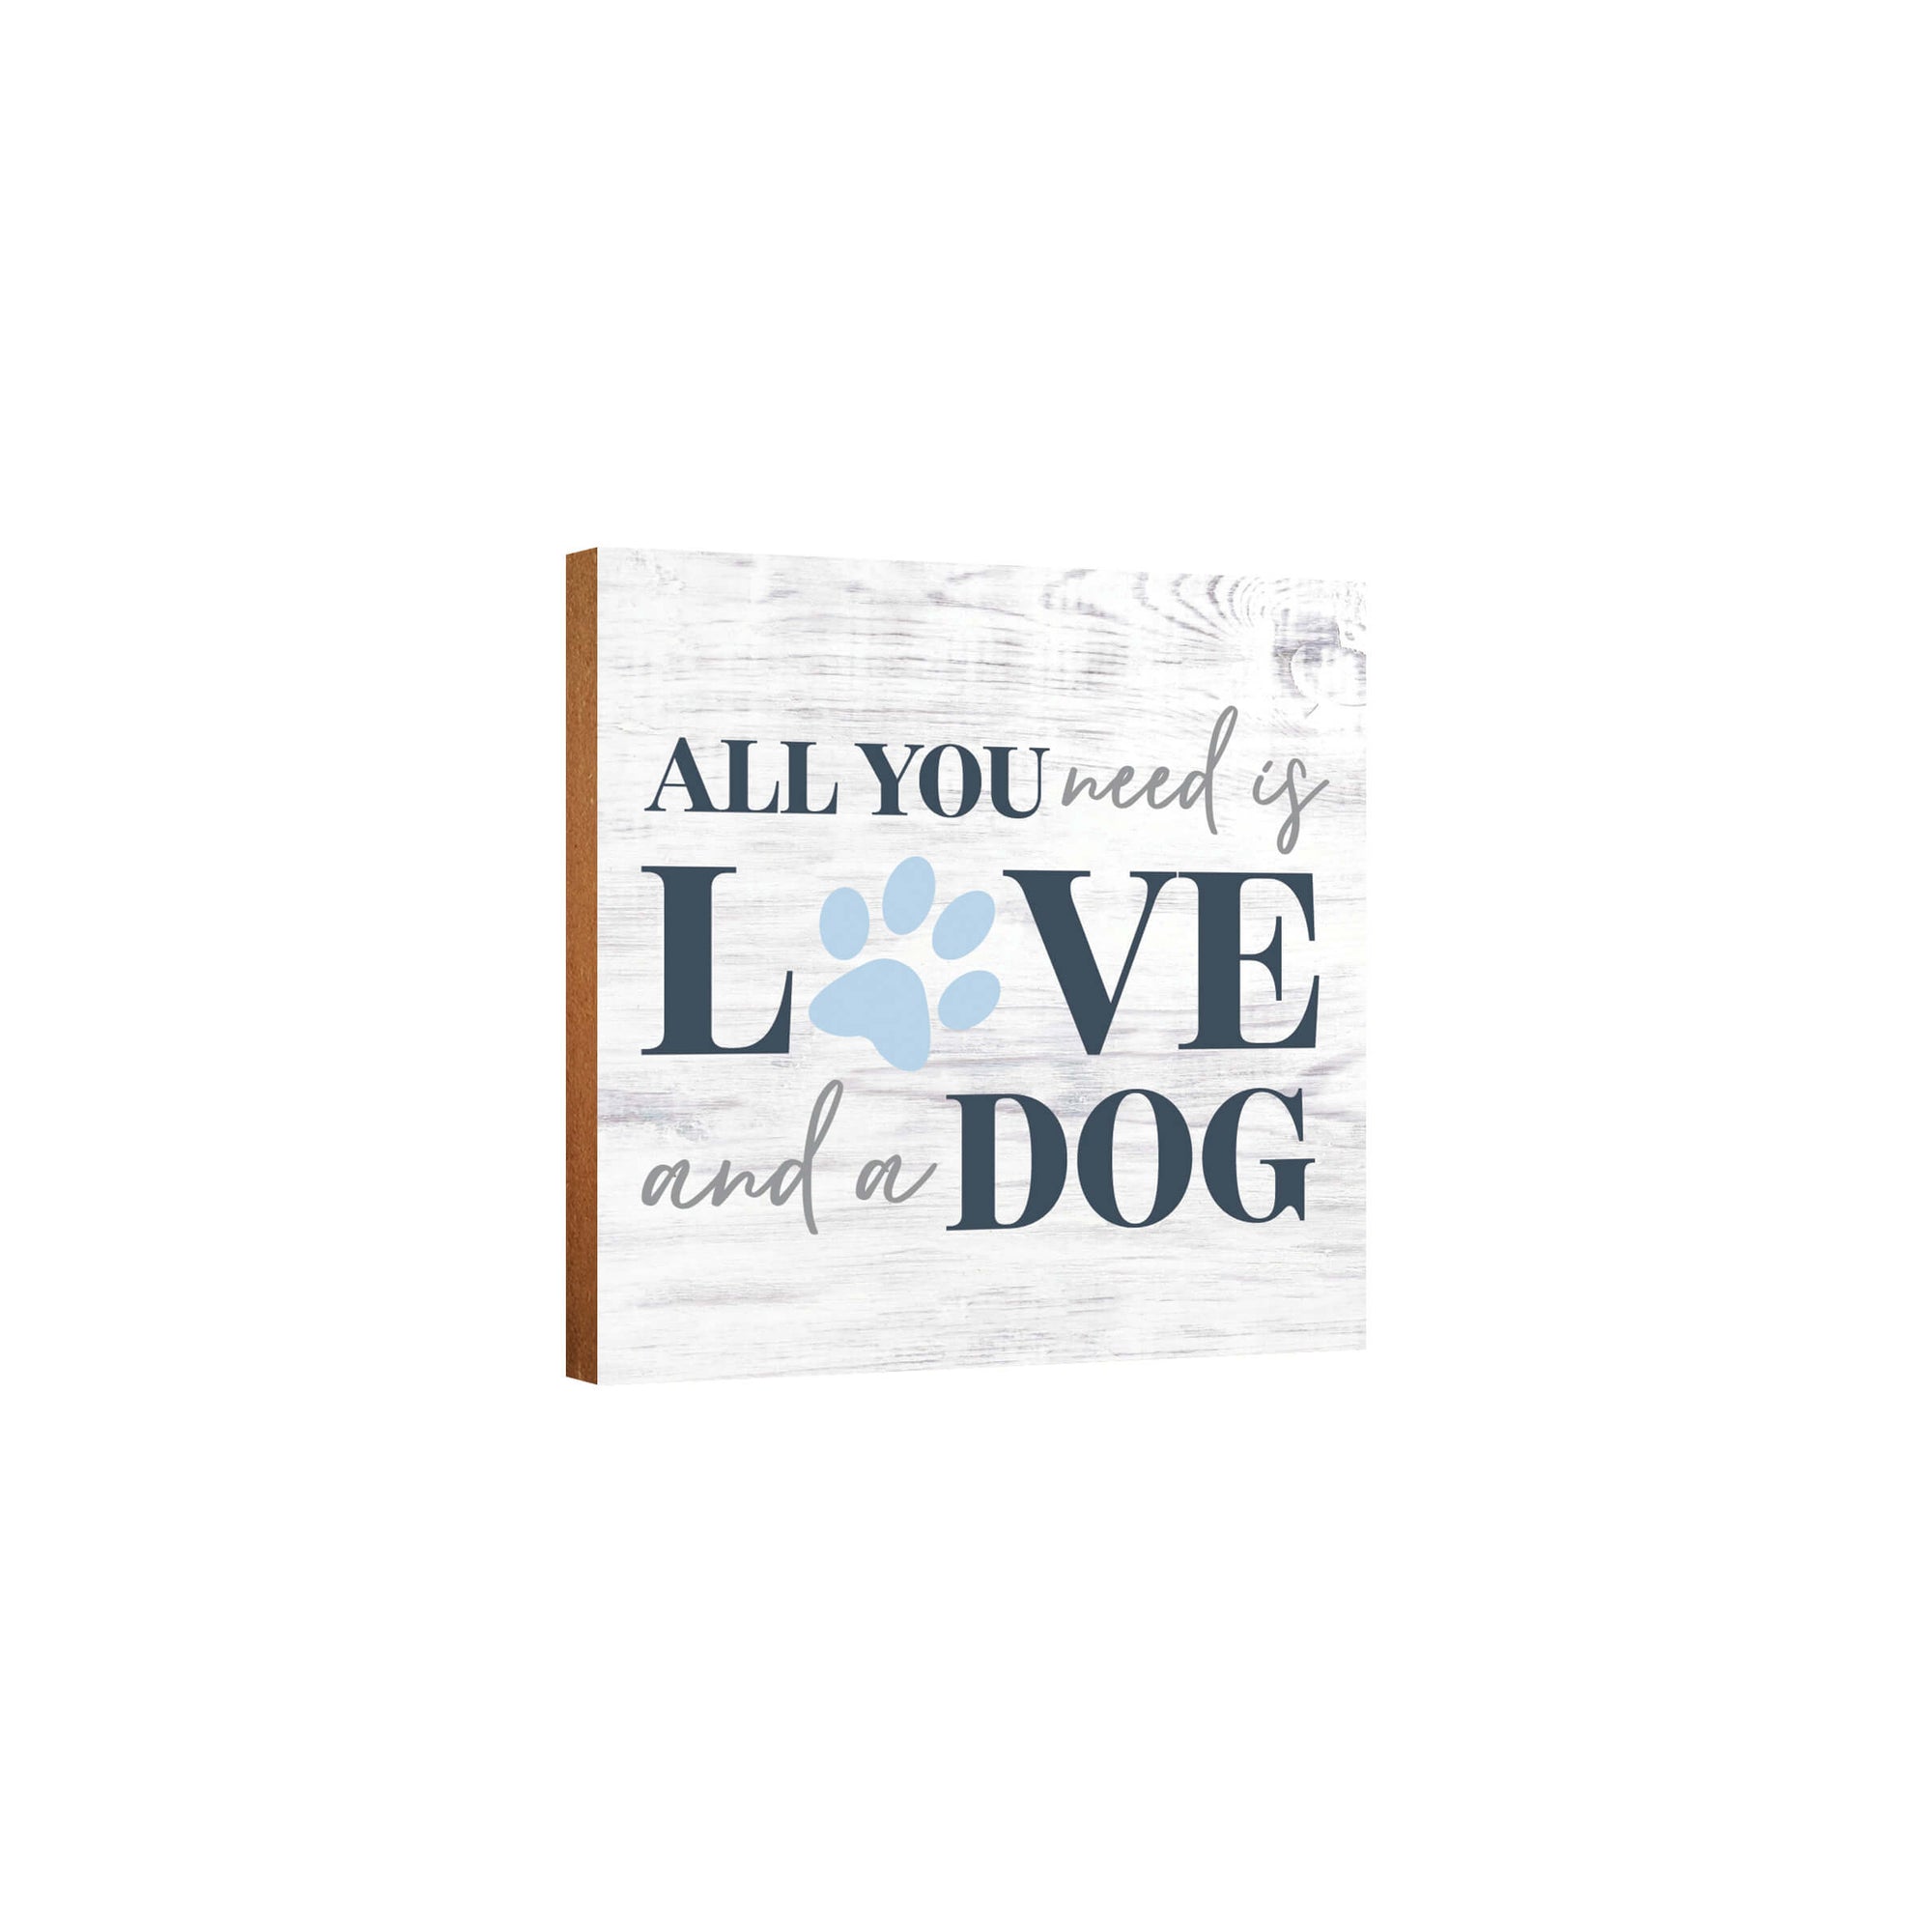 Wooden Shelf Decor and Tabletop Signs with Pet Verses - All You Need